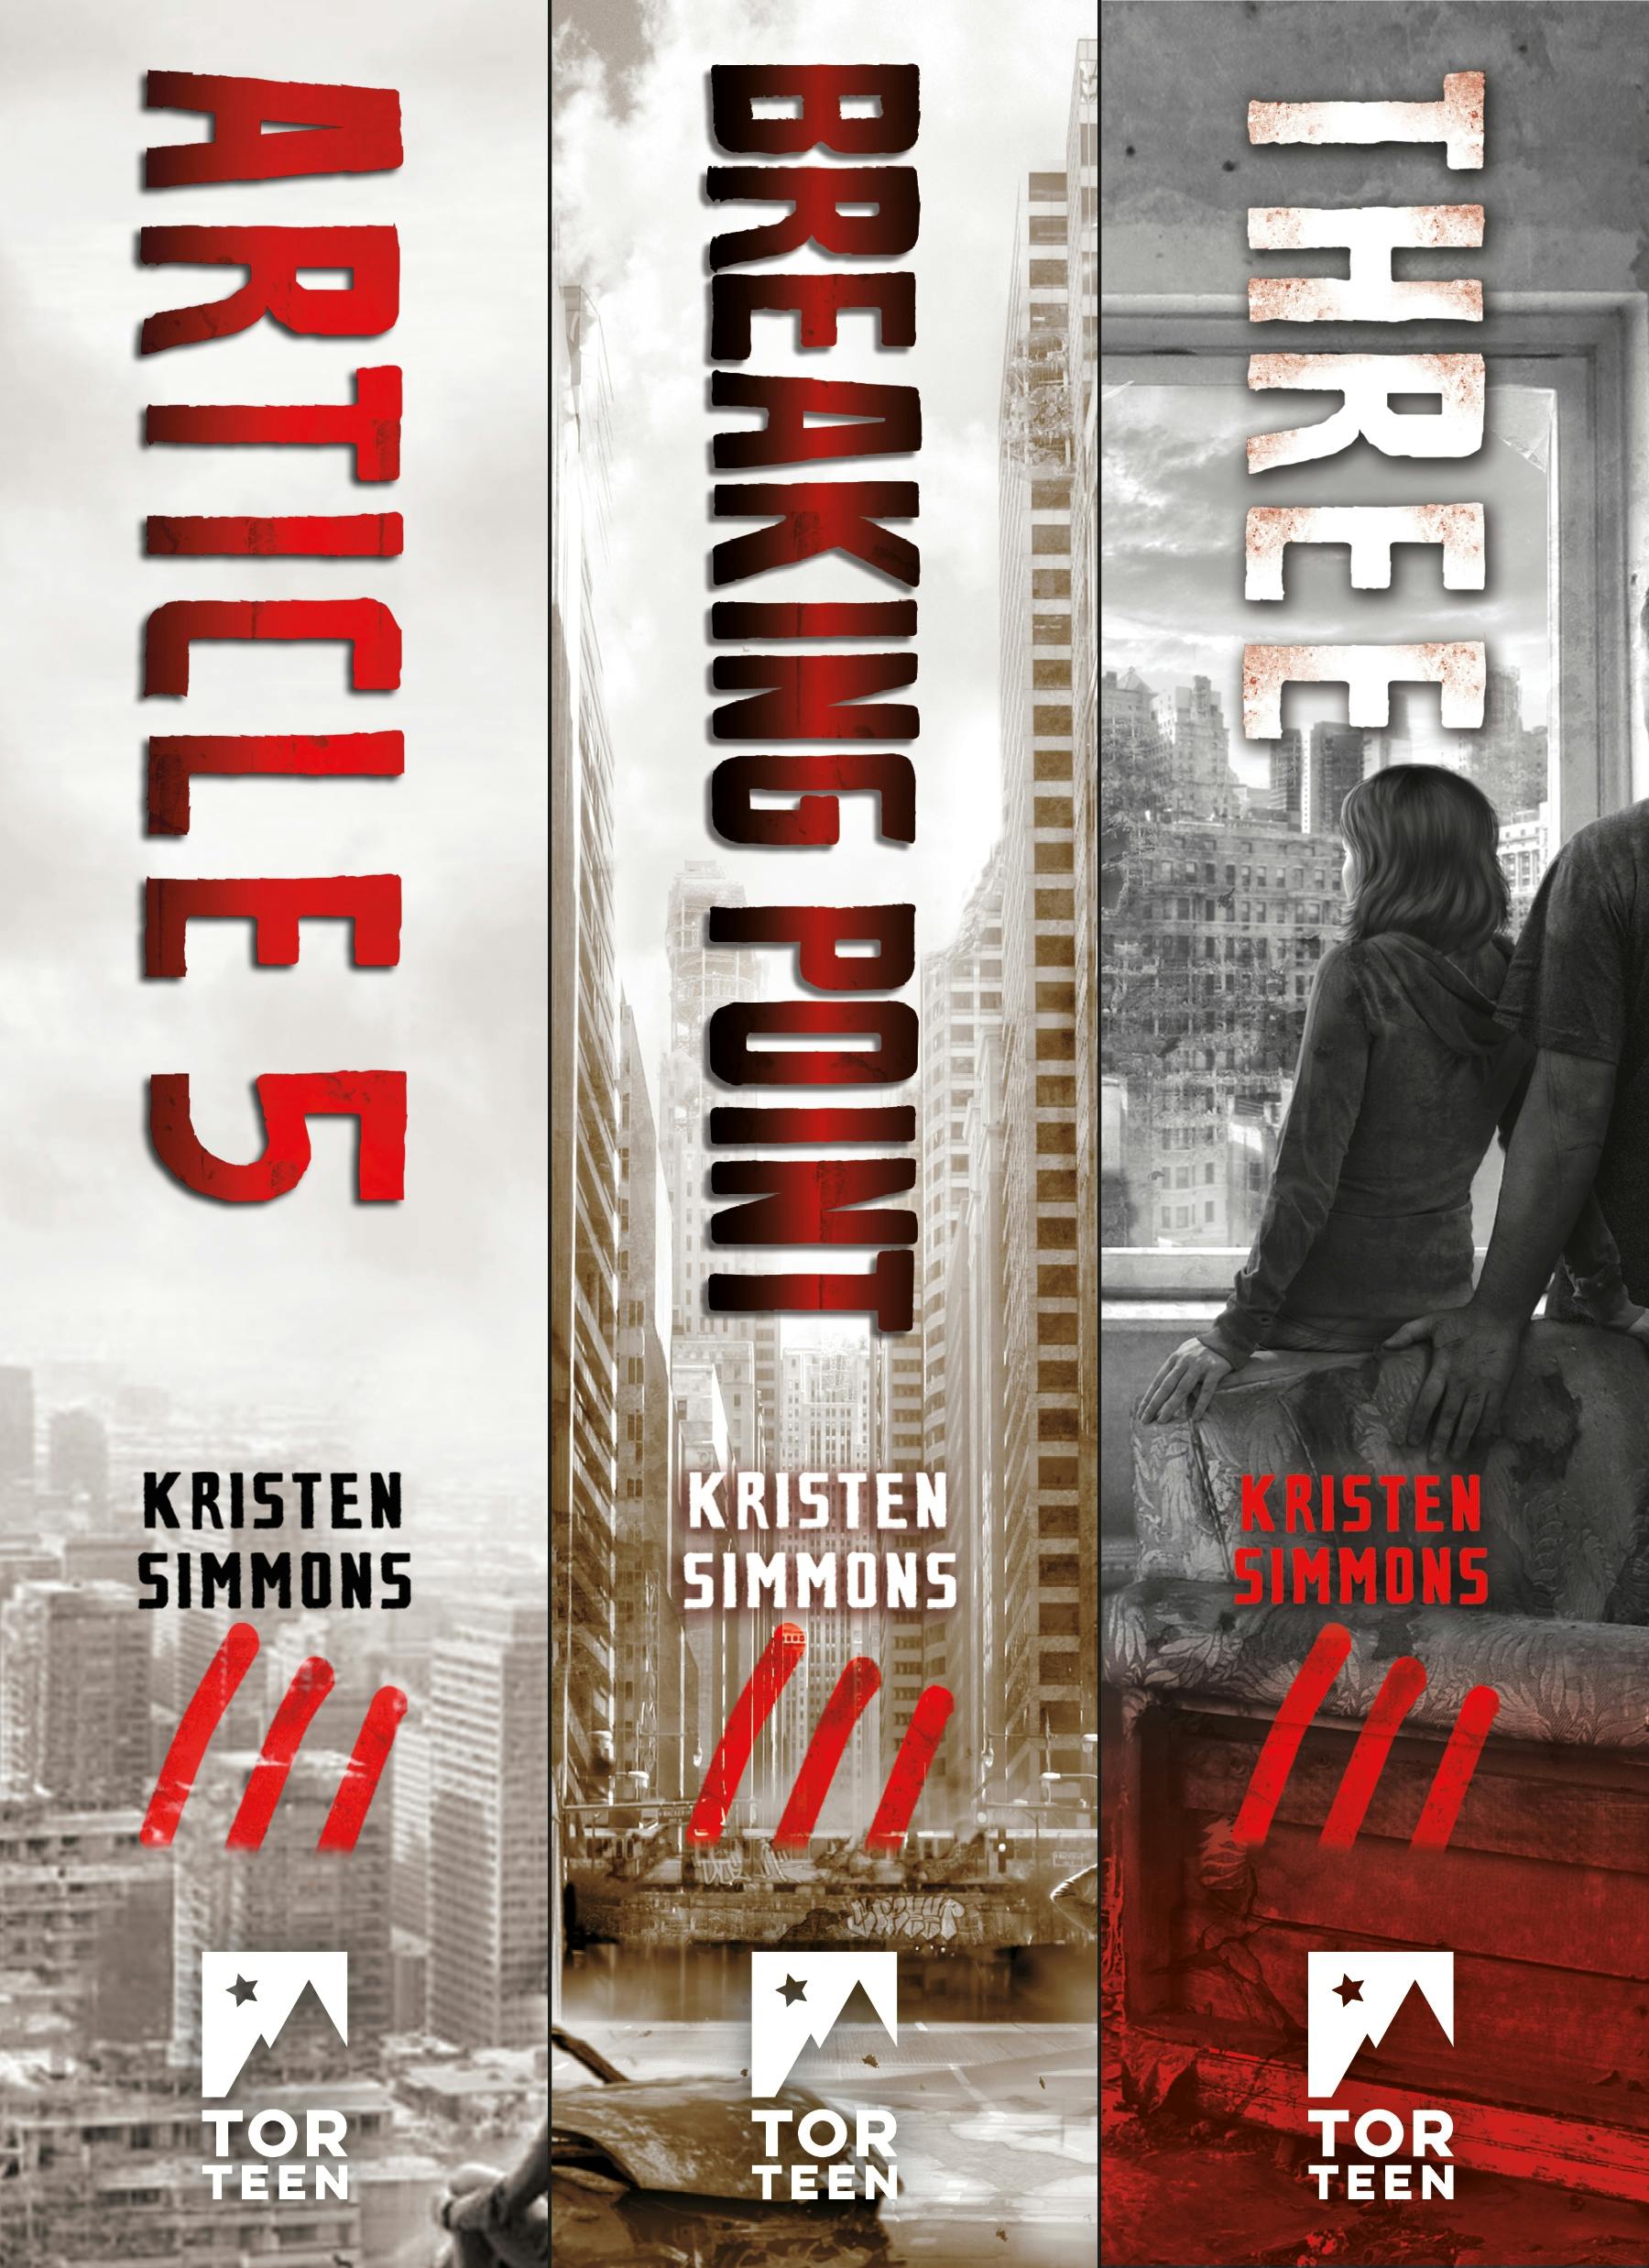 Cover for the book titled as: The Complete Article 5 Trilogy